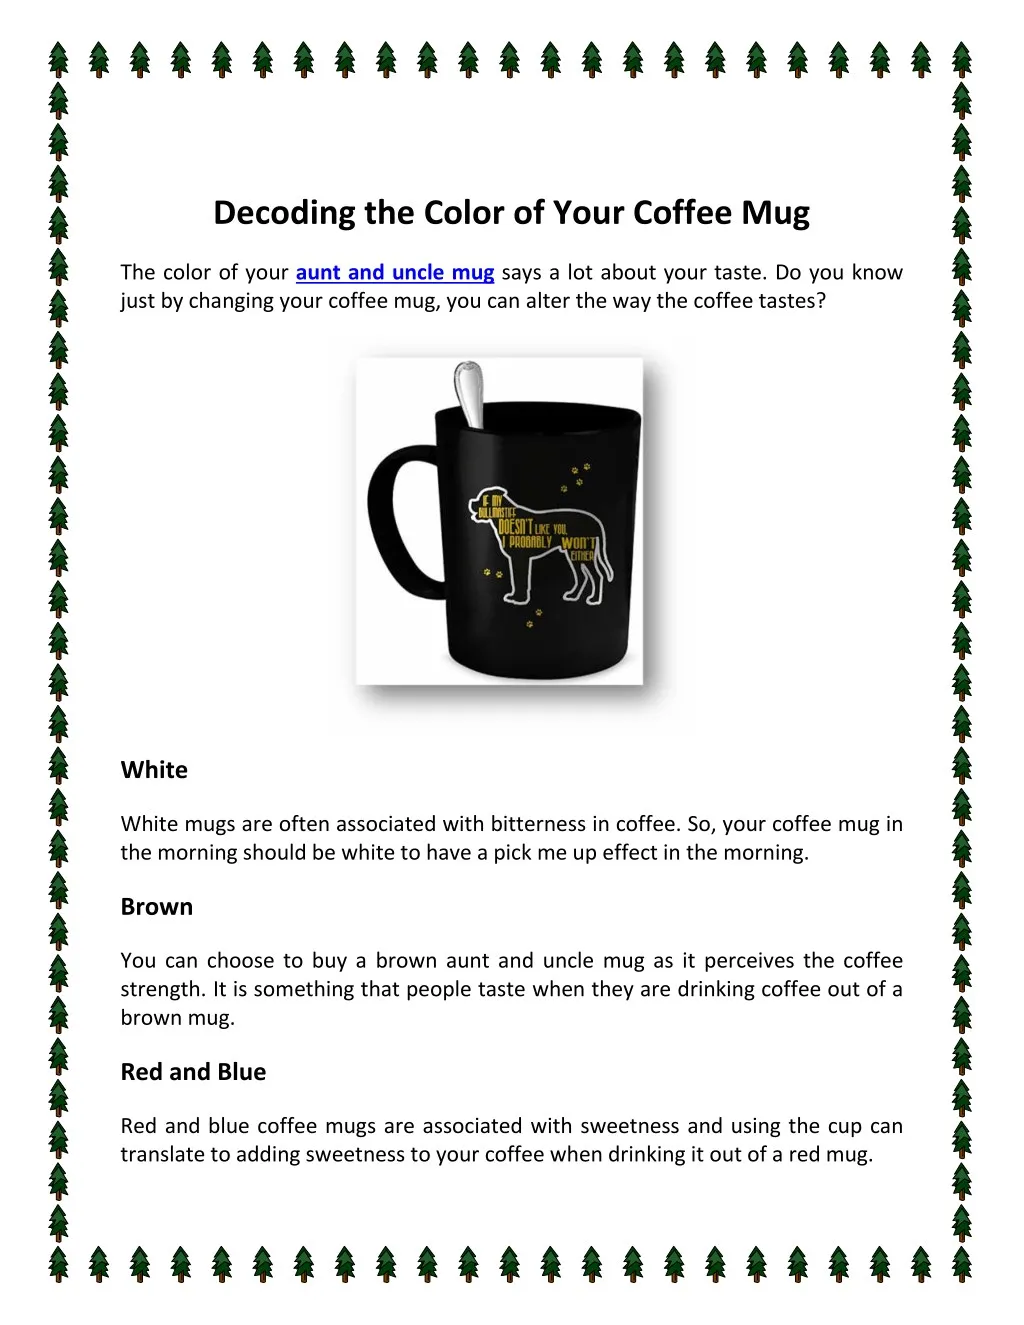 decoding the color of your coffee mug